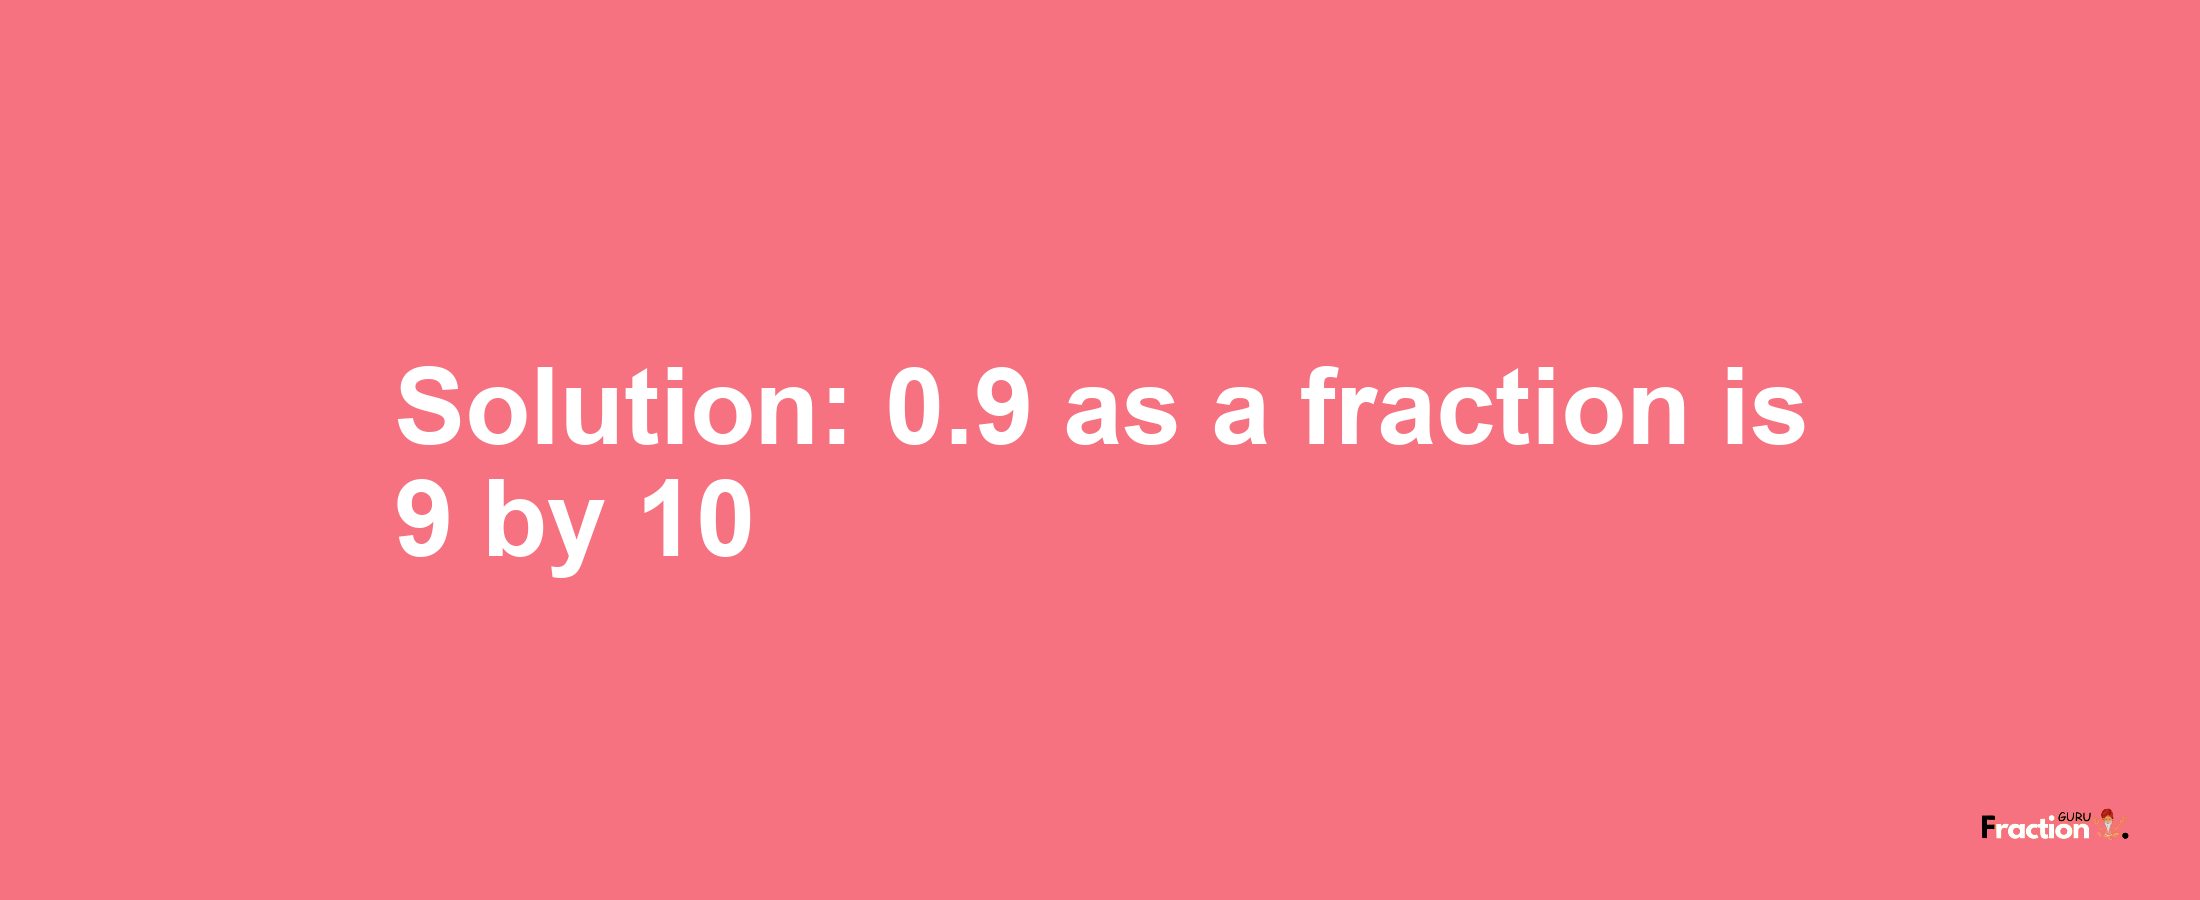 Solution:0.9 as a fraction is 9/10